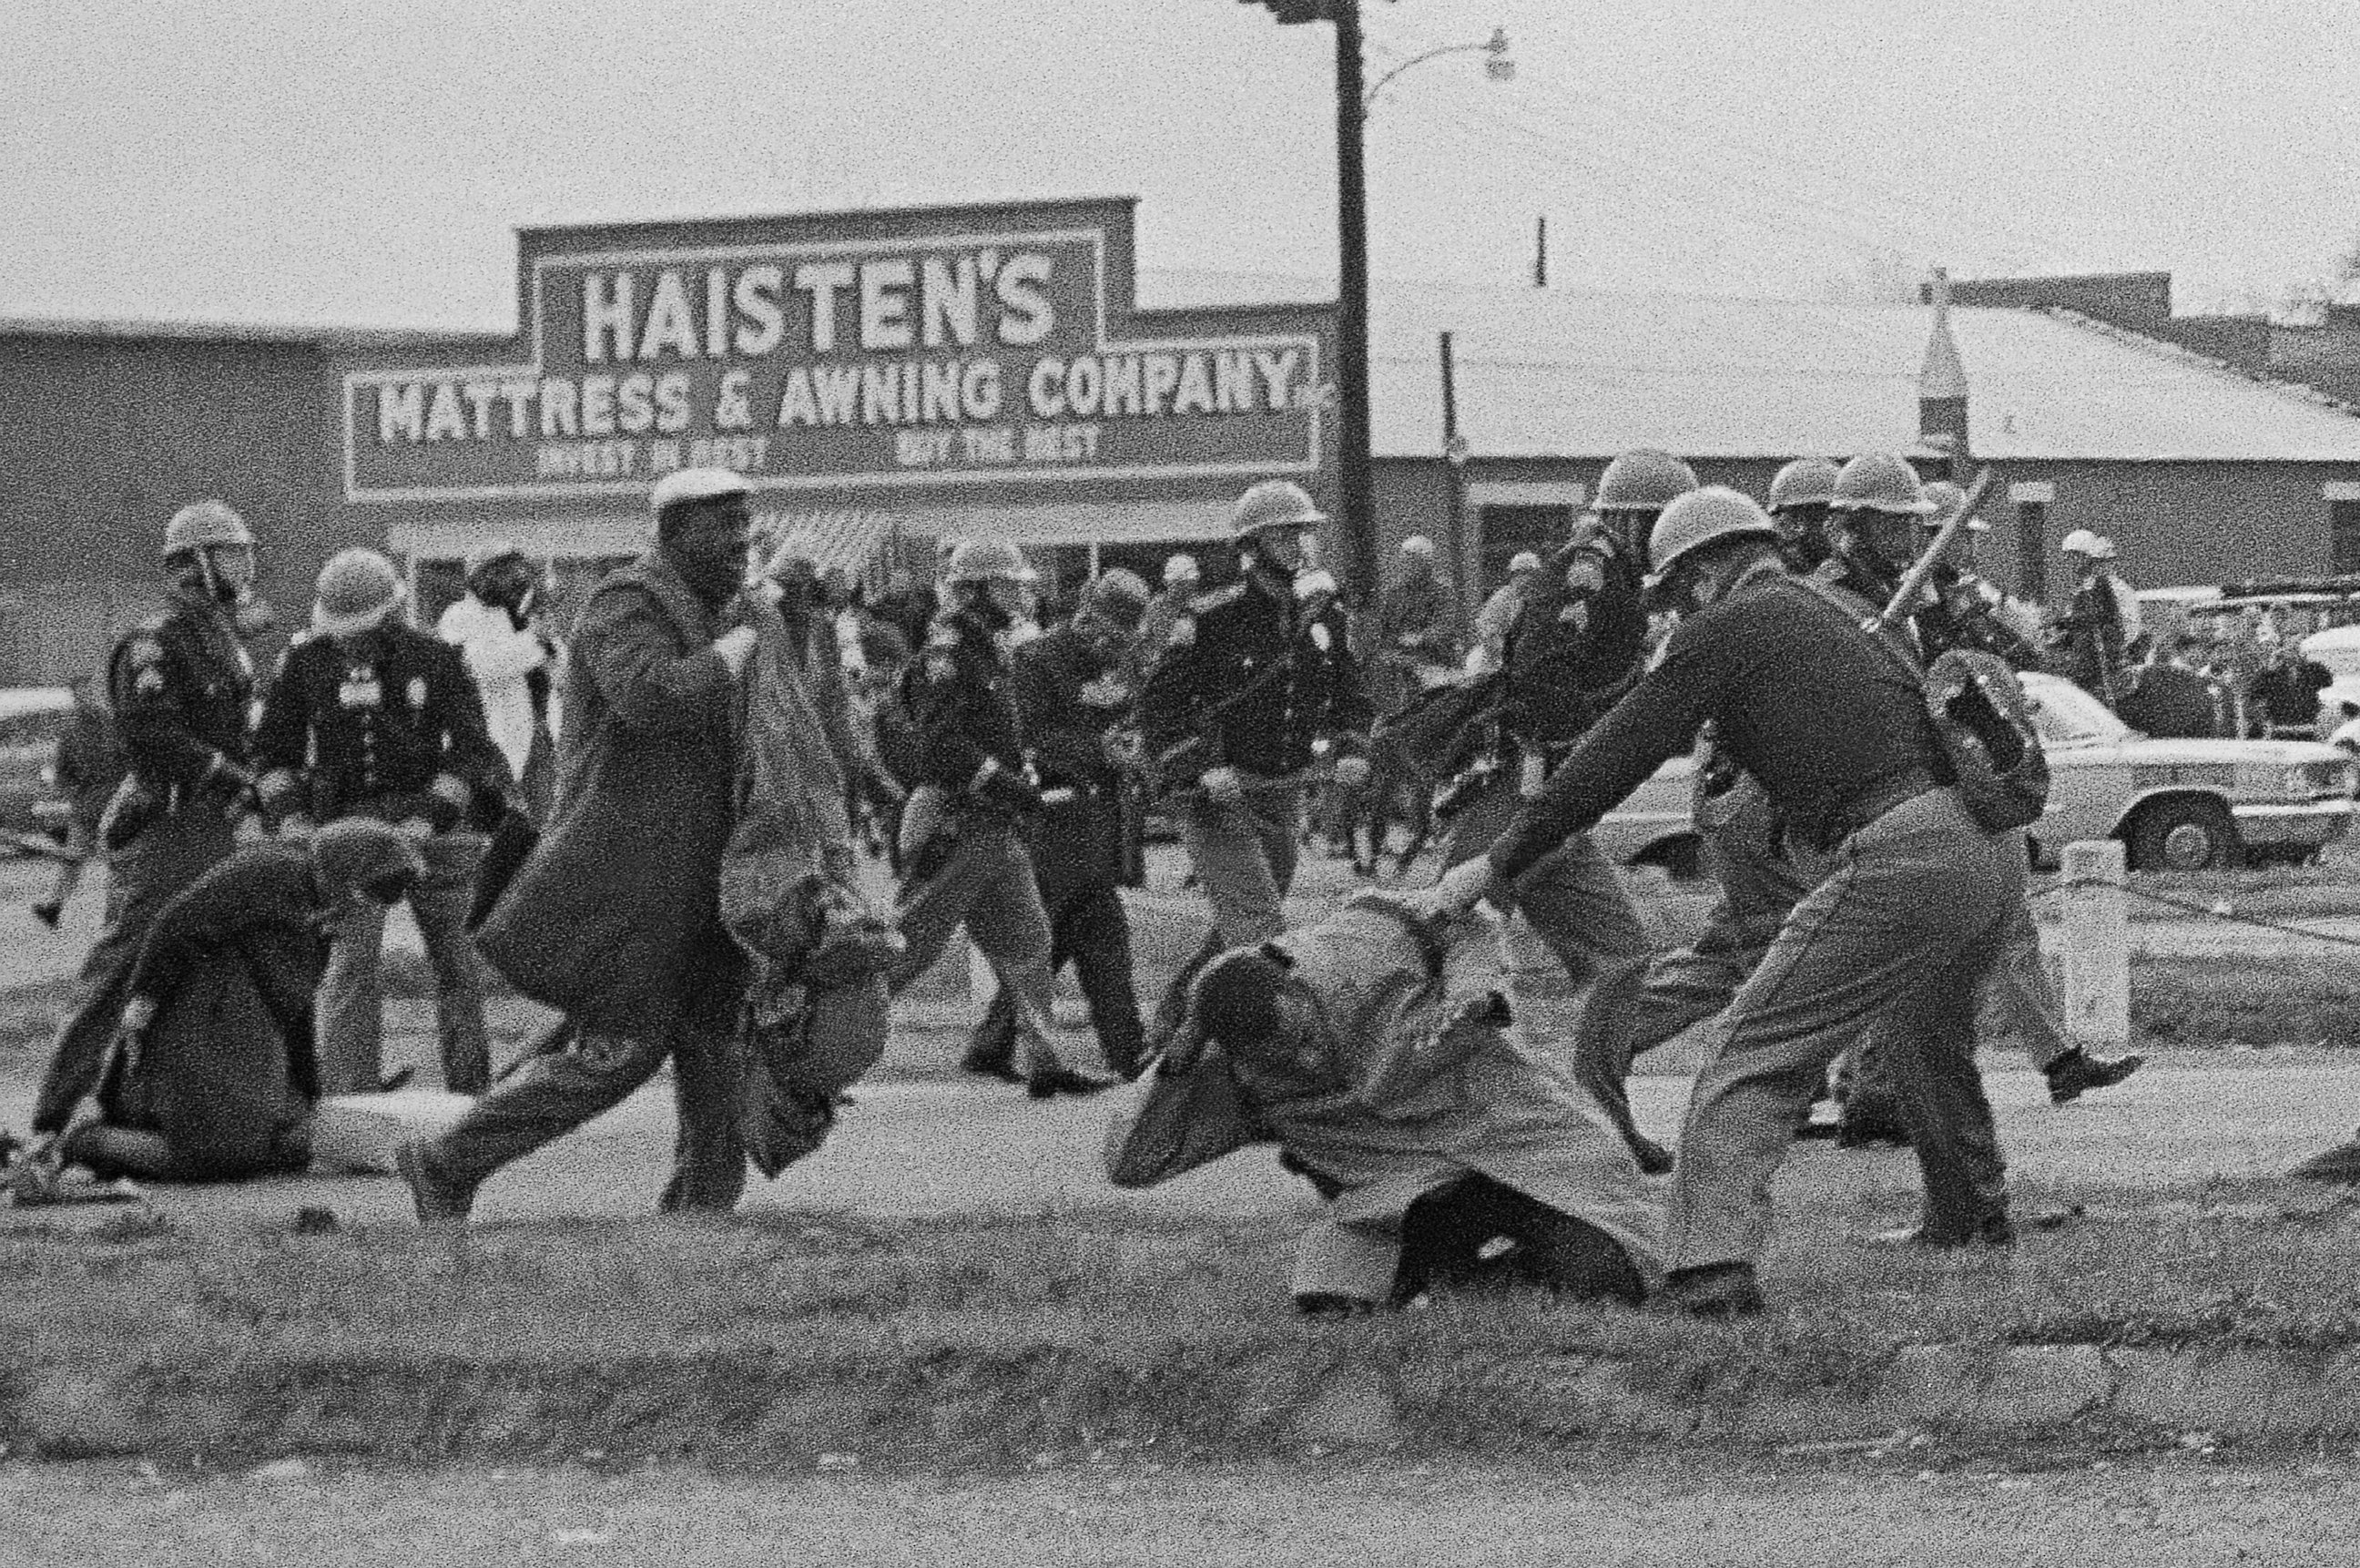 PHOTO: State troopers swing billy clubs to break up a civil rights voting march in Selma, Ala., March 7, 1965. John Lewis, chairman of the Student Nonviolent Coordinating Committee, in the foreground, is being beaten by a state trooper. 